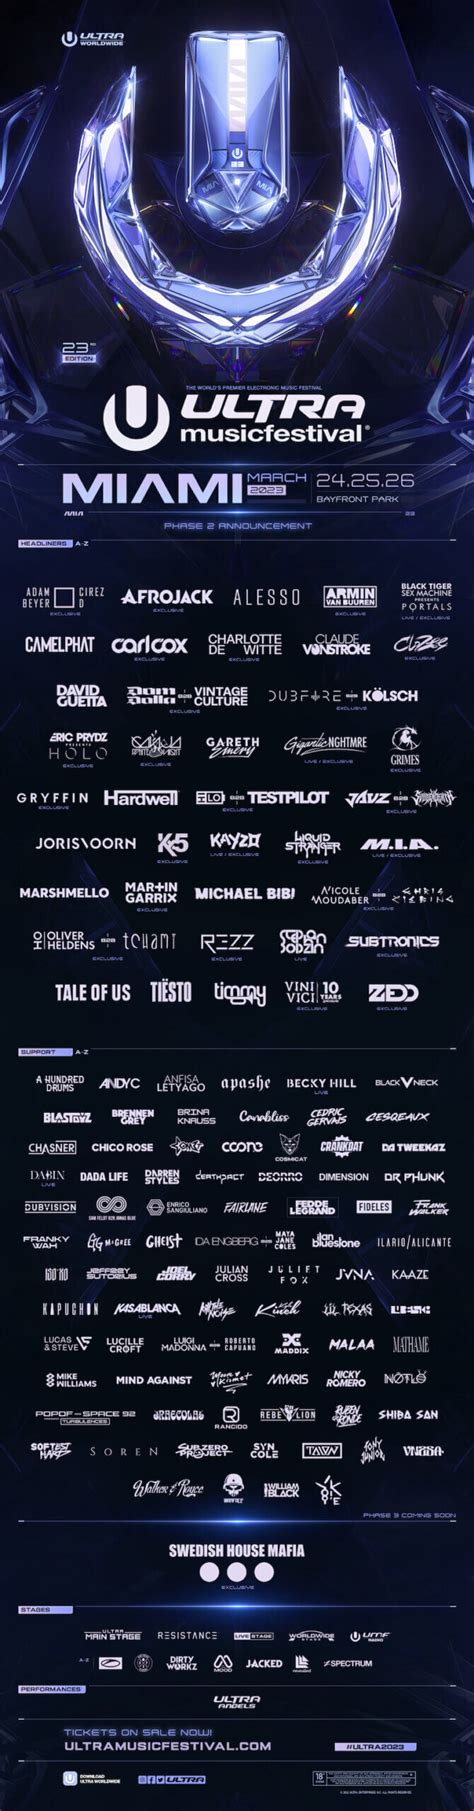 Ultra Music Festival Unveils Star Studded Phase 2 Lineup Featuring More